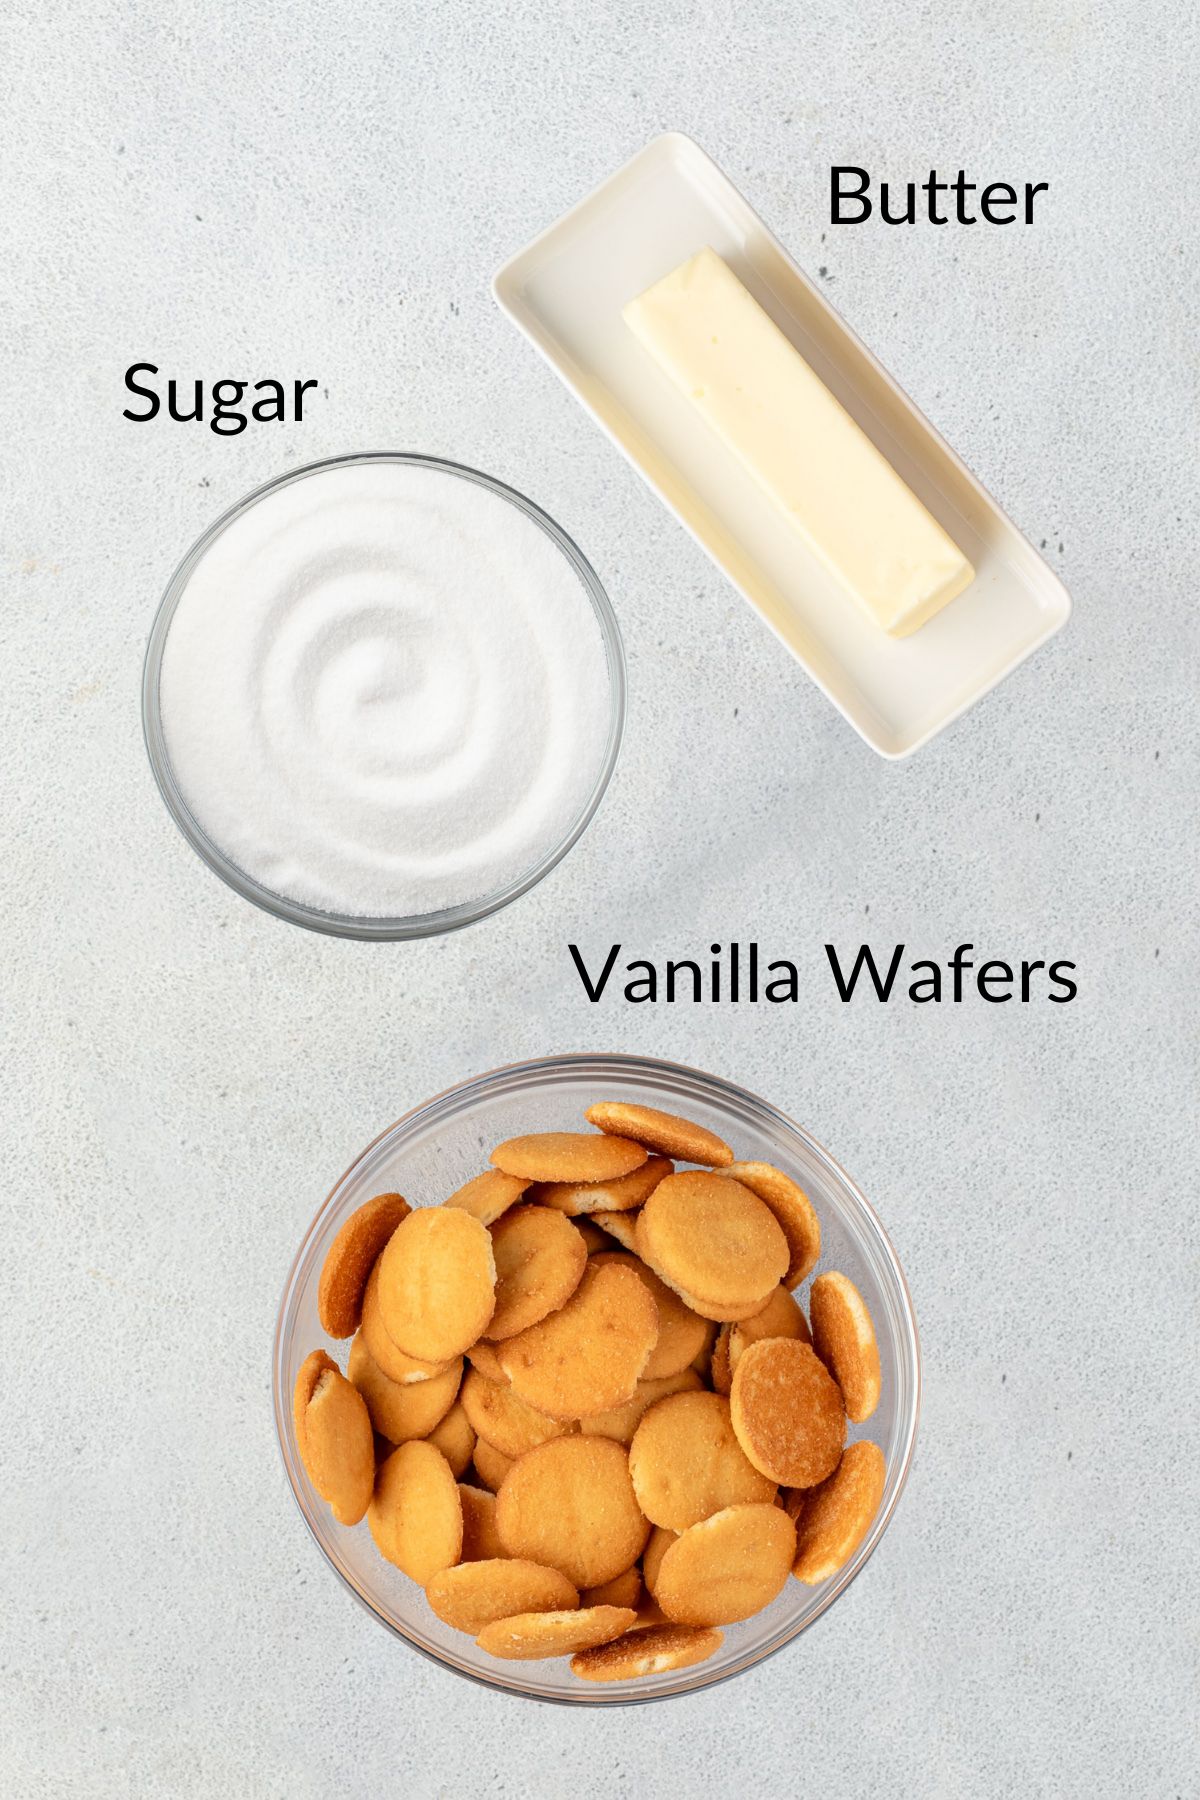 A stick of butter, bowl of sugar, and bowl of vanilla wafer cookies.